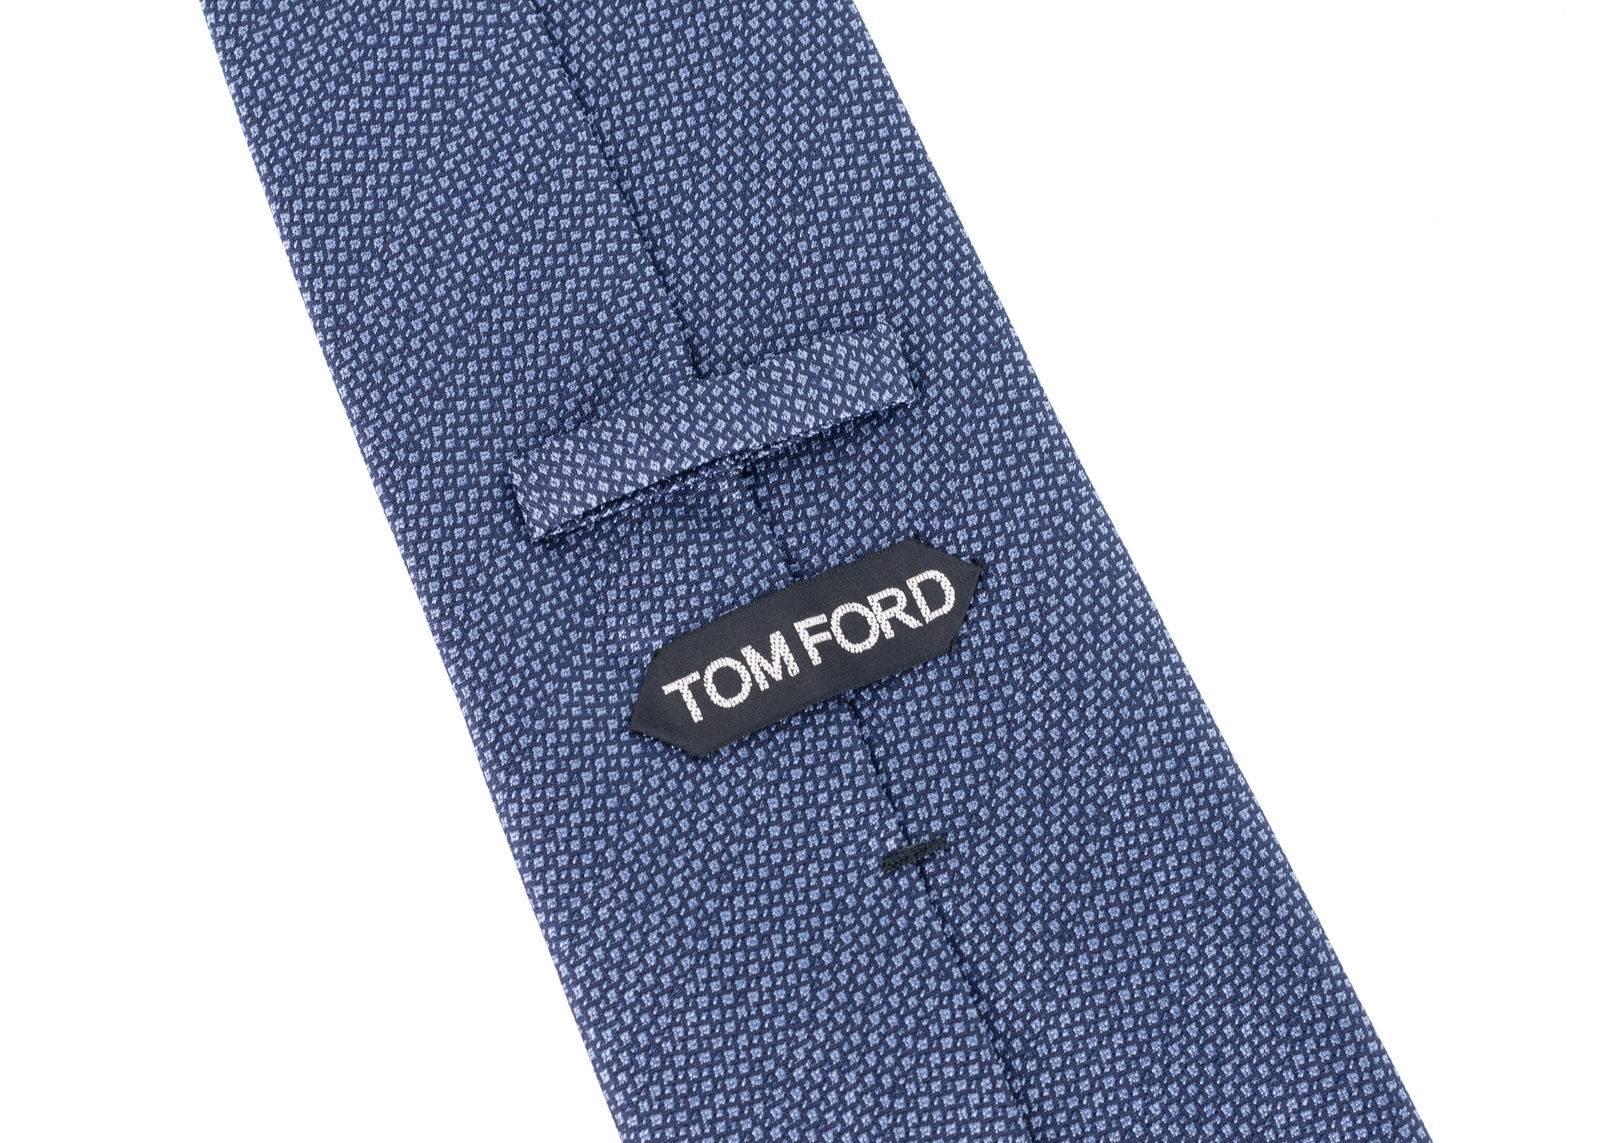 talian luxury brand, Tom Ford, has crafted these gorgeous Silk Tie for important special occasions and professional events. The tie is great to pair with your favorite solid color button down and blazers with your chosen pair or classic trousers.